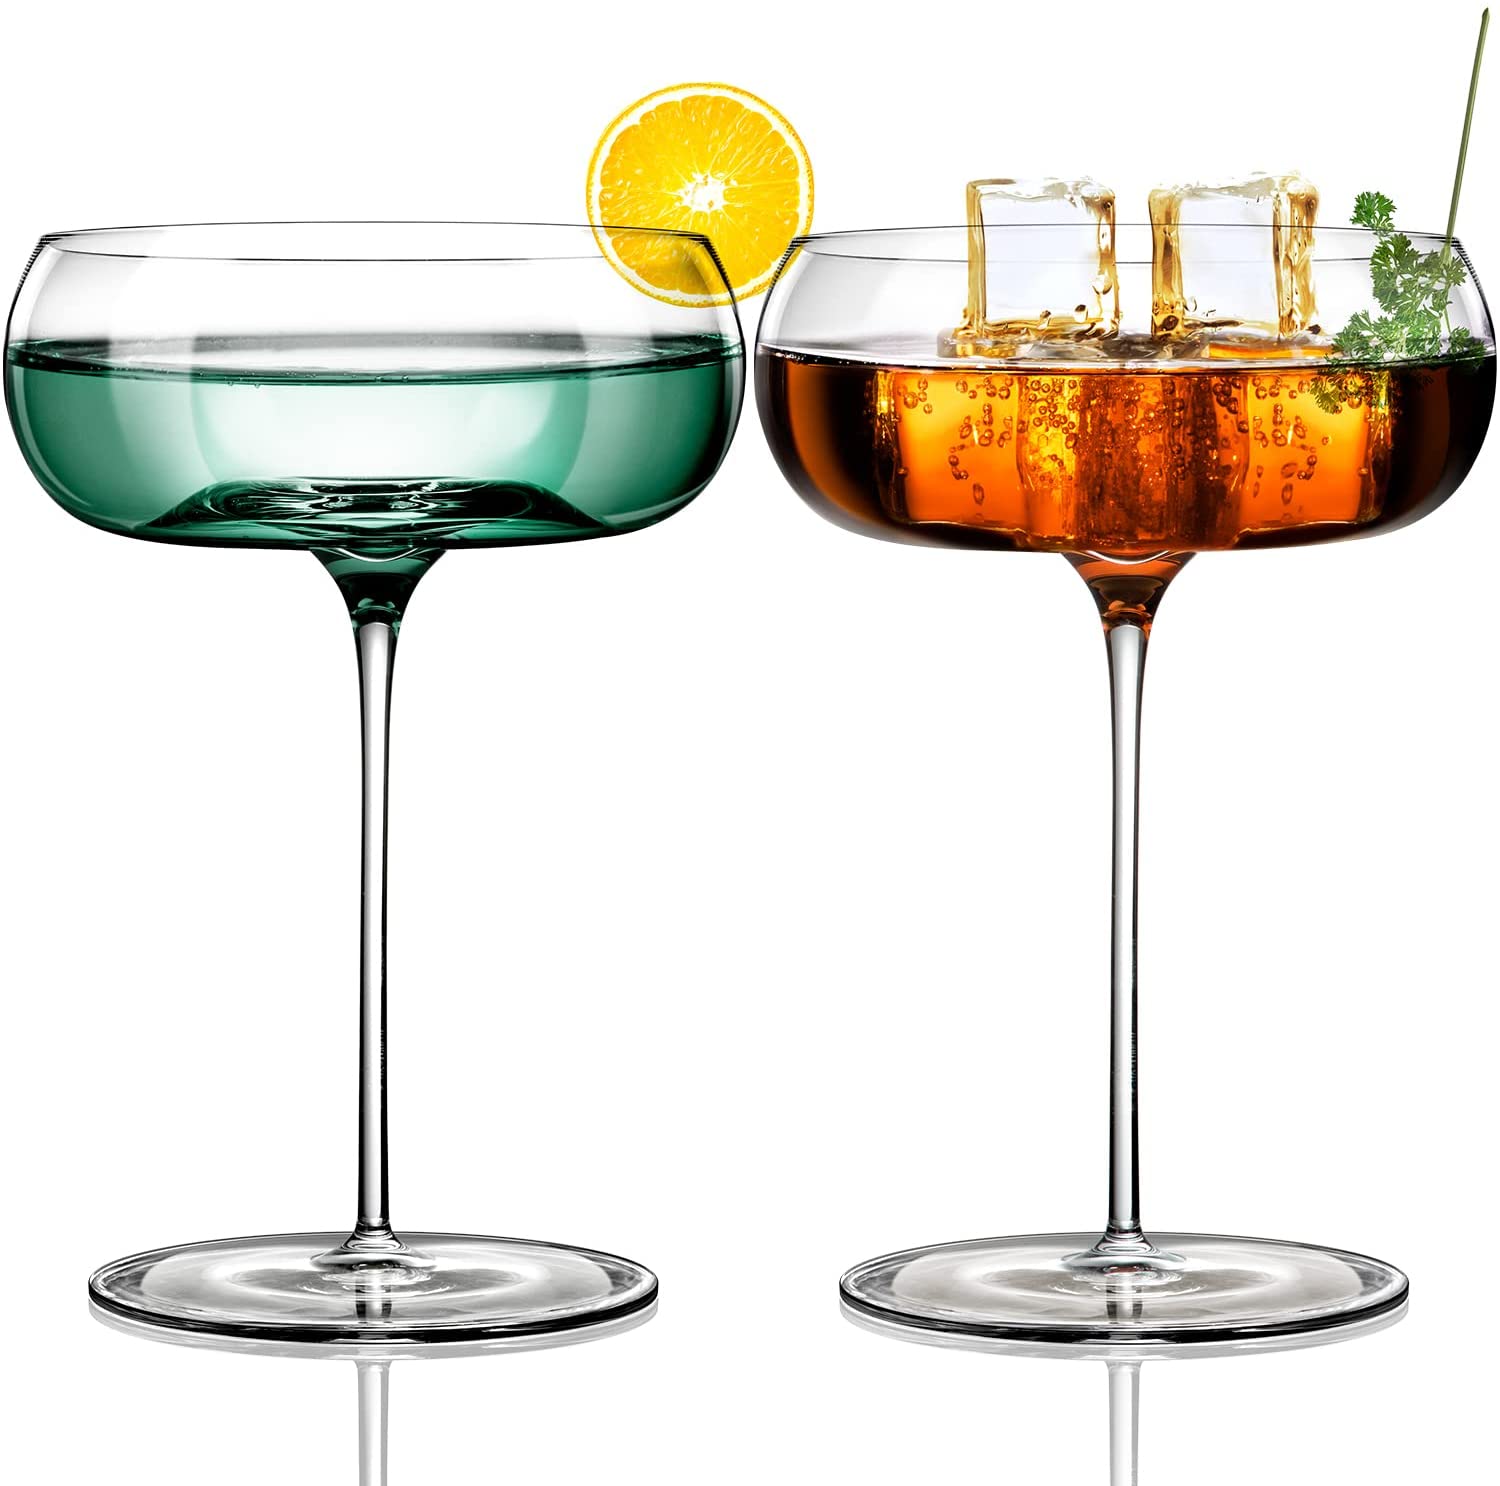 Crystal Coupe Glasses Lead-Free Premium Crystal Clear Glass Martini Cocktail Glasses Stemmed Cocktail Glass Gift Set Featured Image